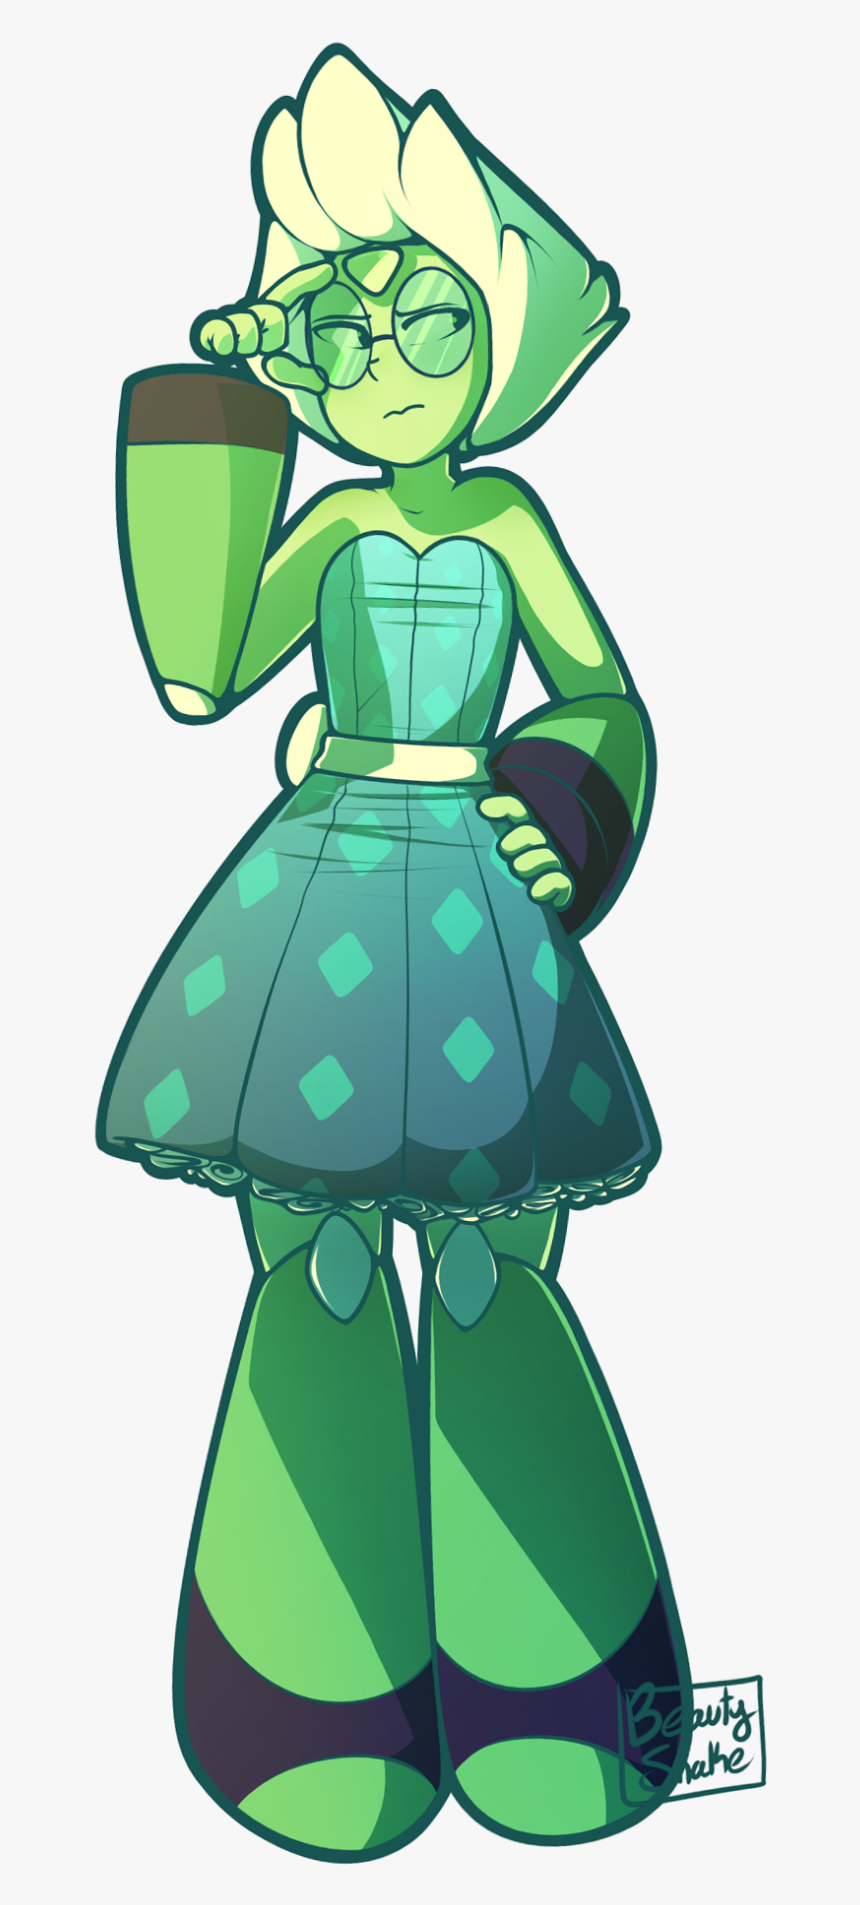 Attack The Light Green Clothing Fictional Character - Steven Universe Maid Peridot